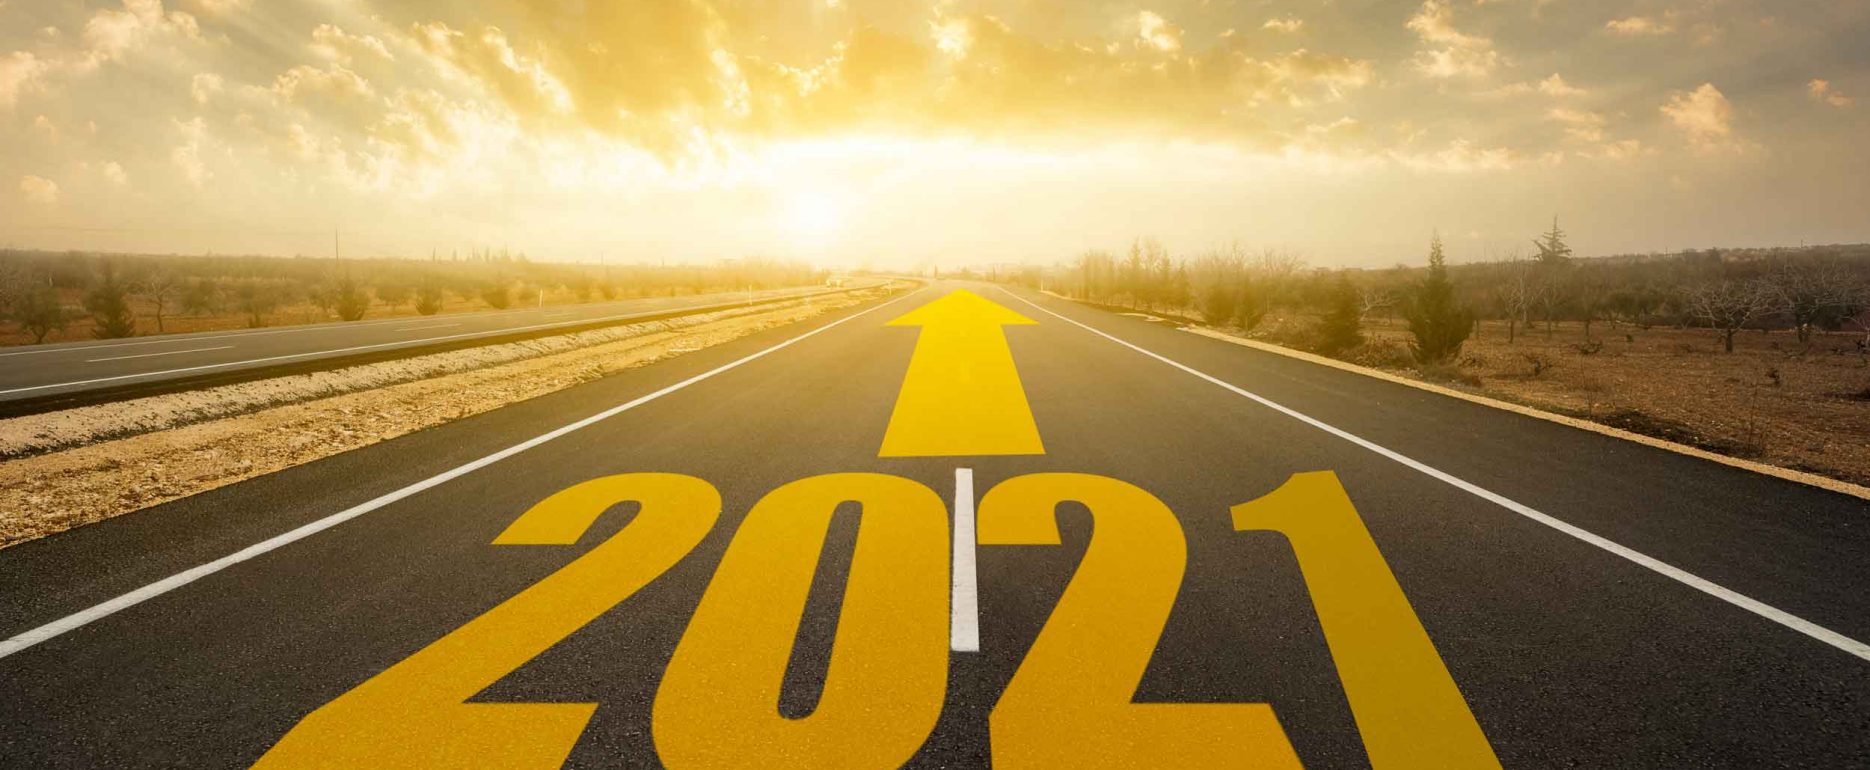 2021 and Yellow arrow on a road